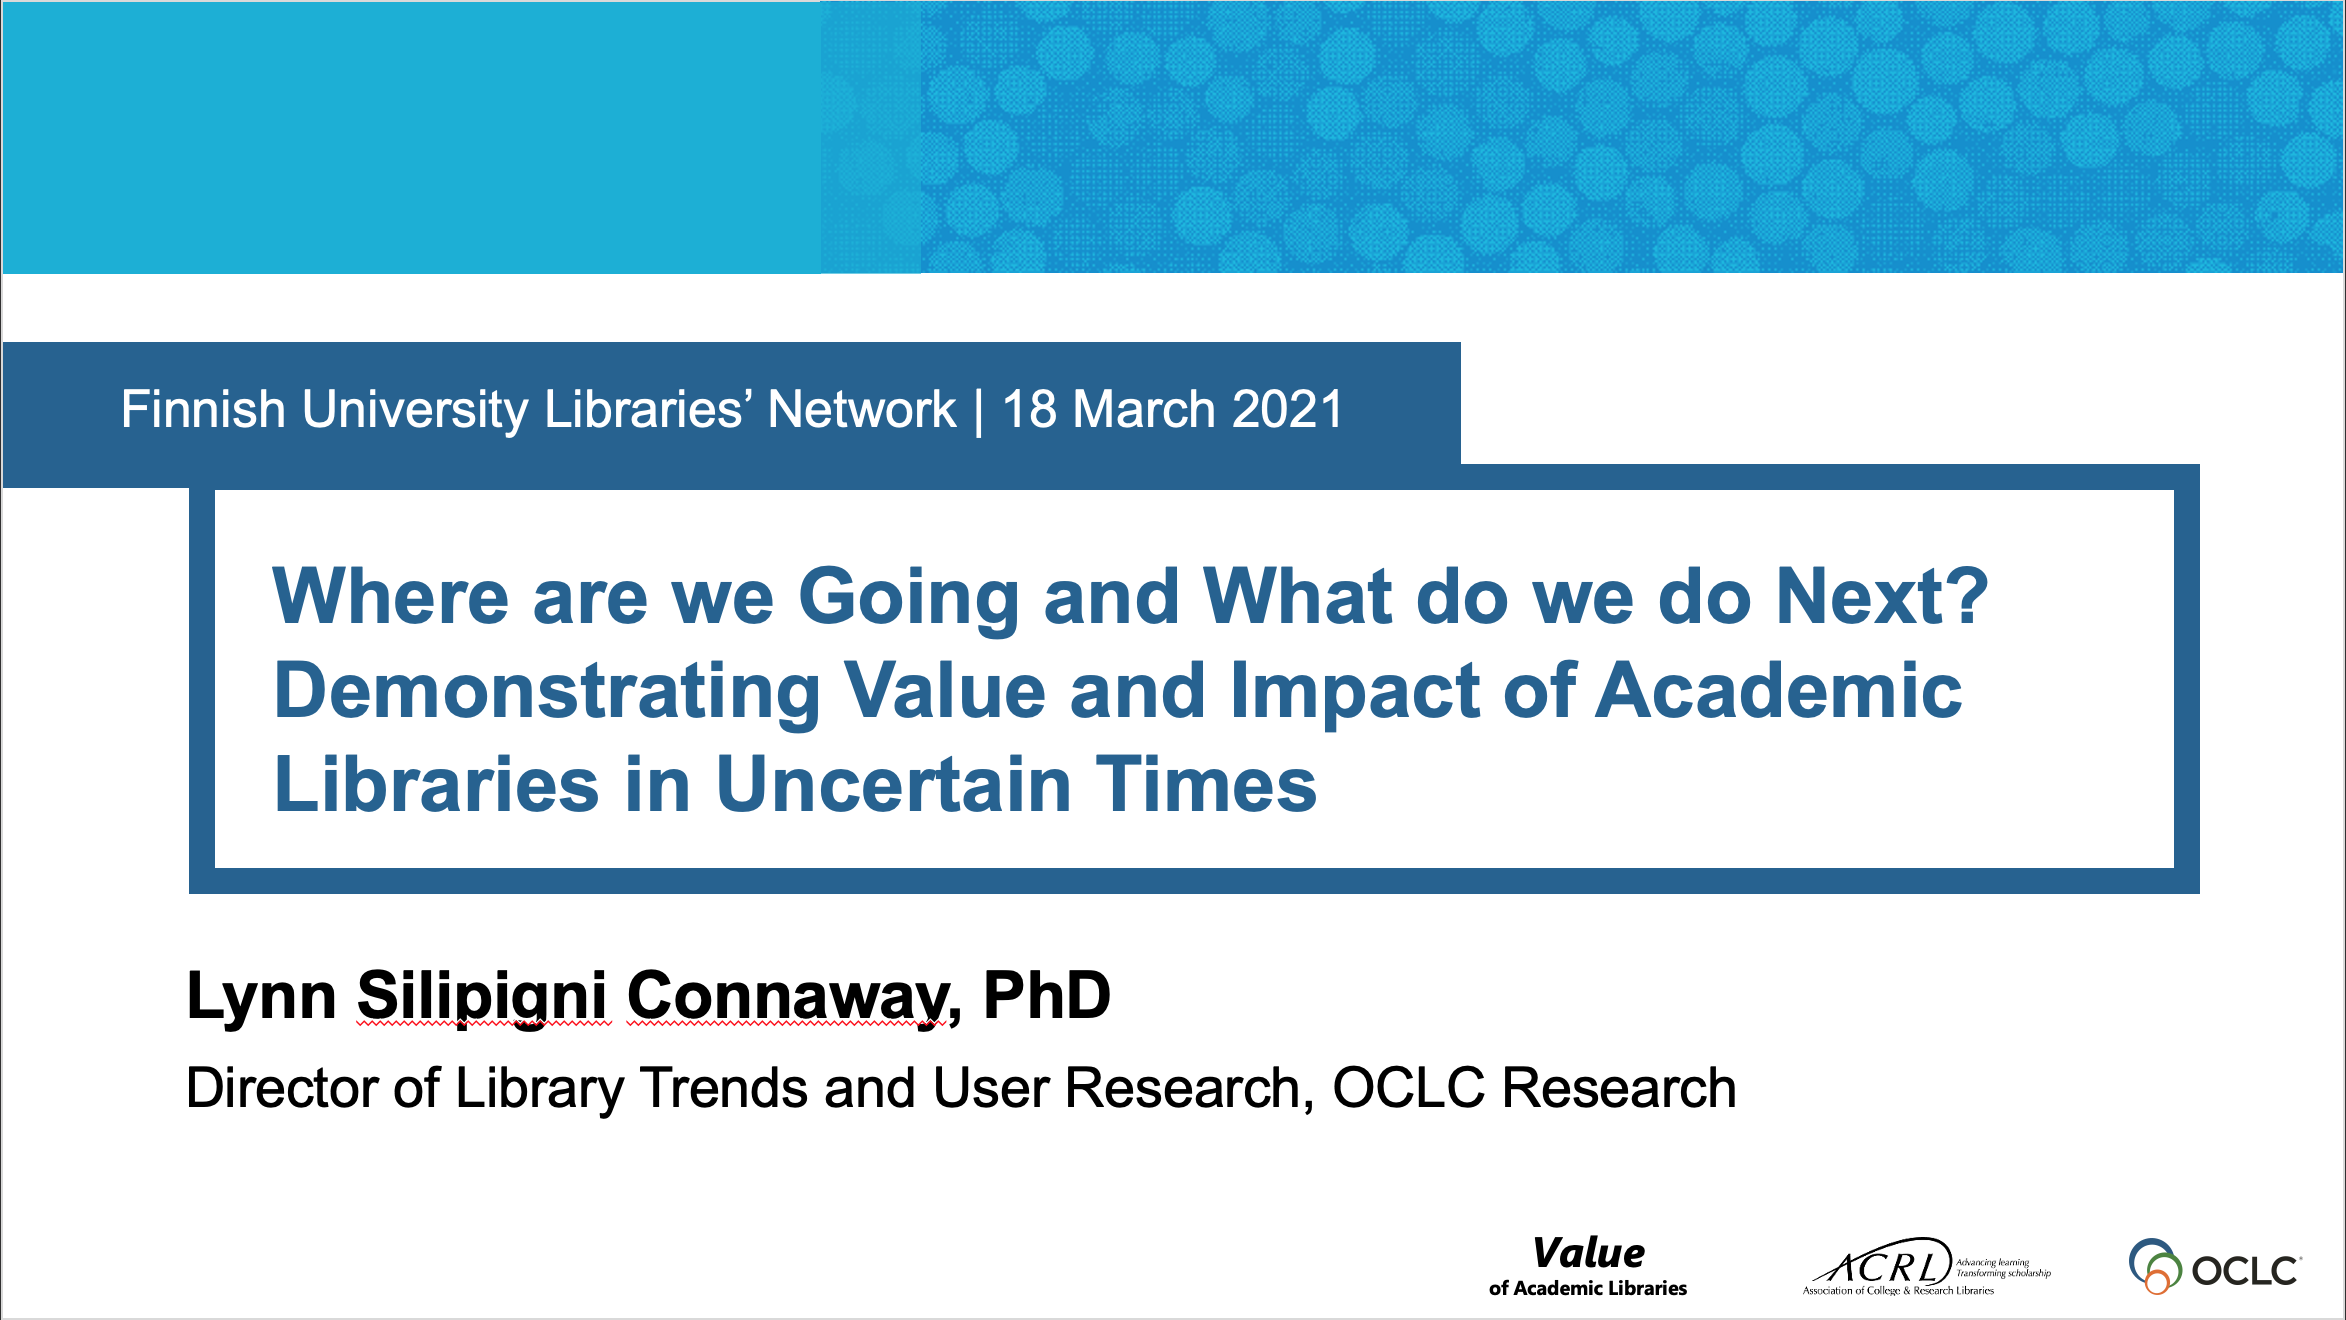 Where are we Going and What do we do Next? Demonstrating Value and Impact of Academic Libraries in Uncertain Times